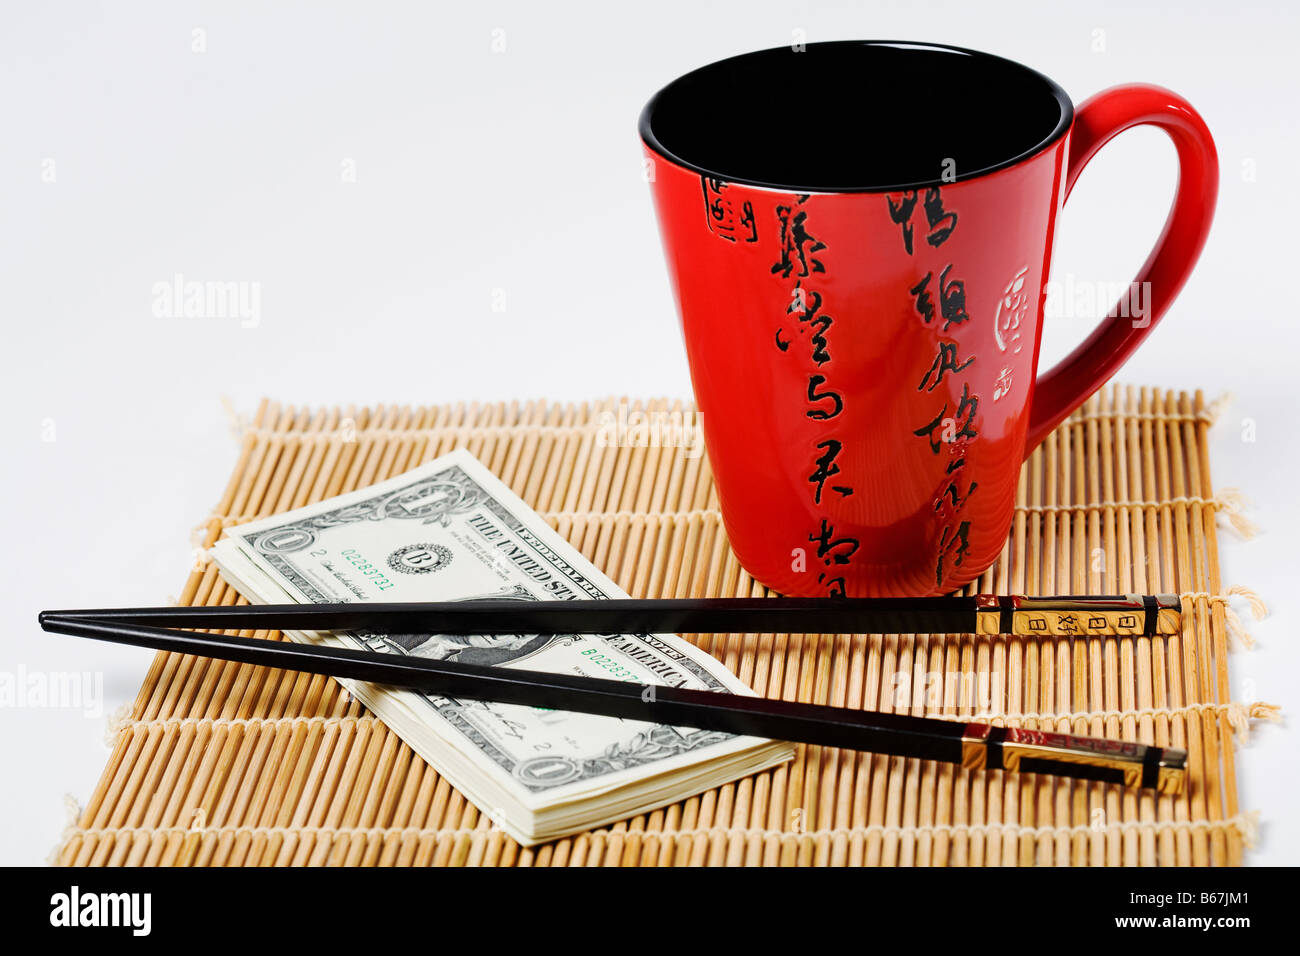 Chopsticks with a stack of US paper currency and a cup on place mat Stock Photo